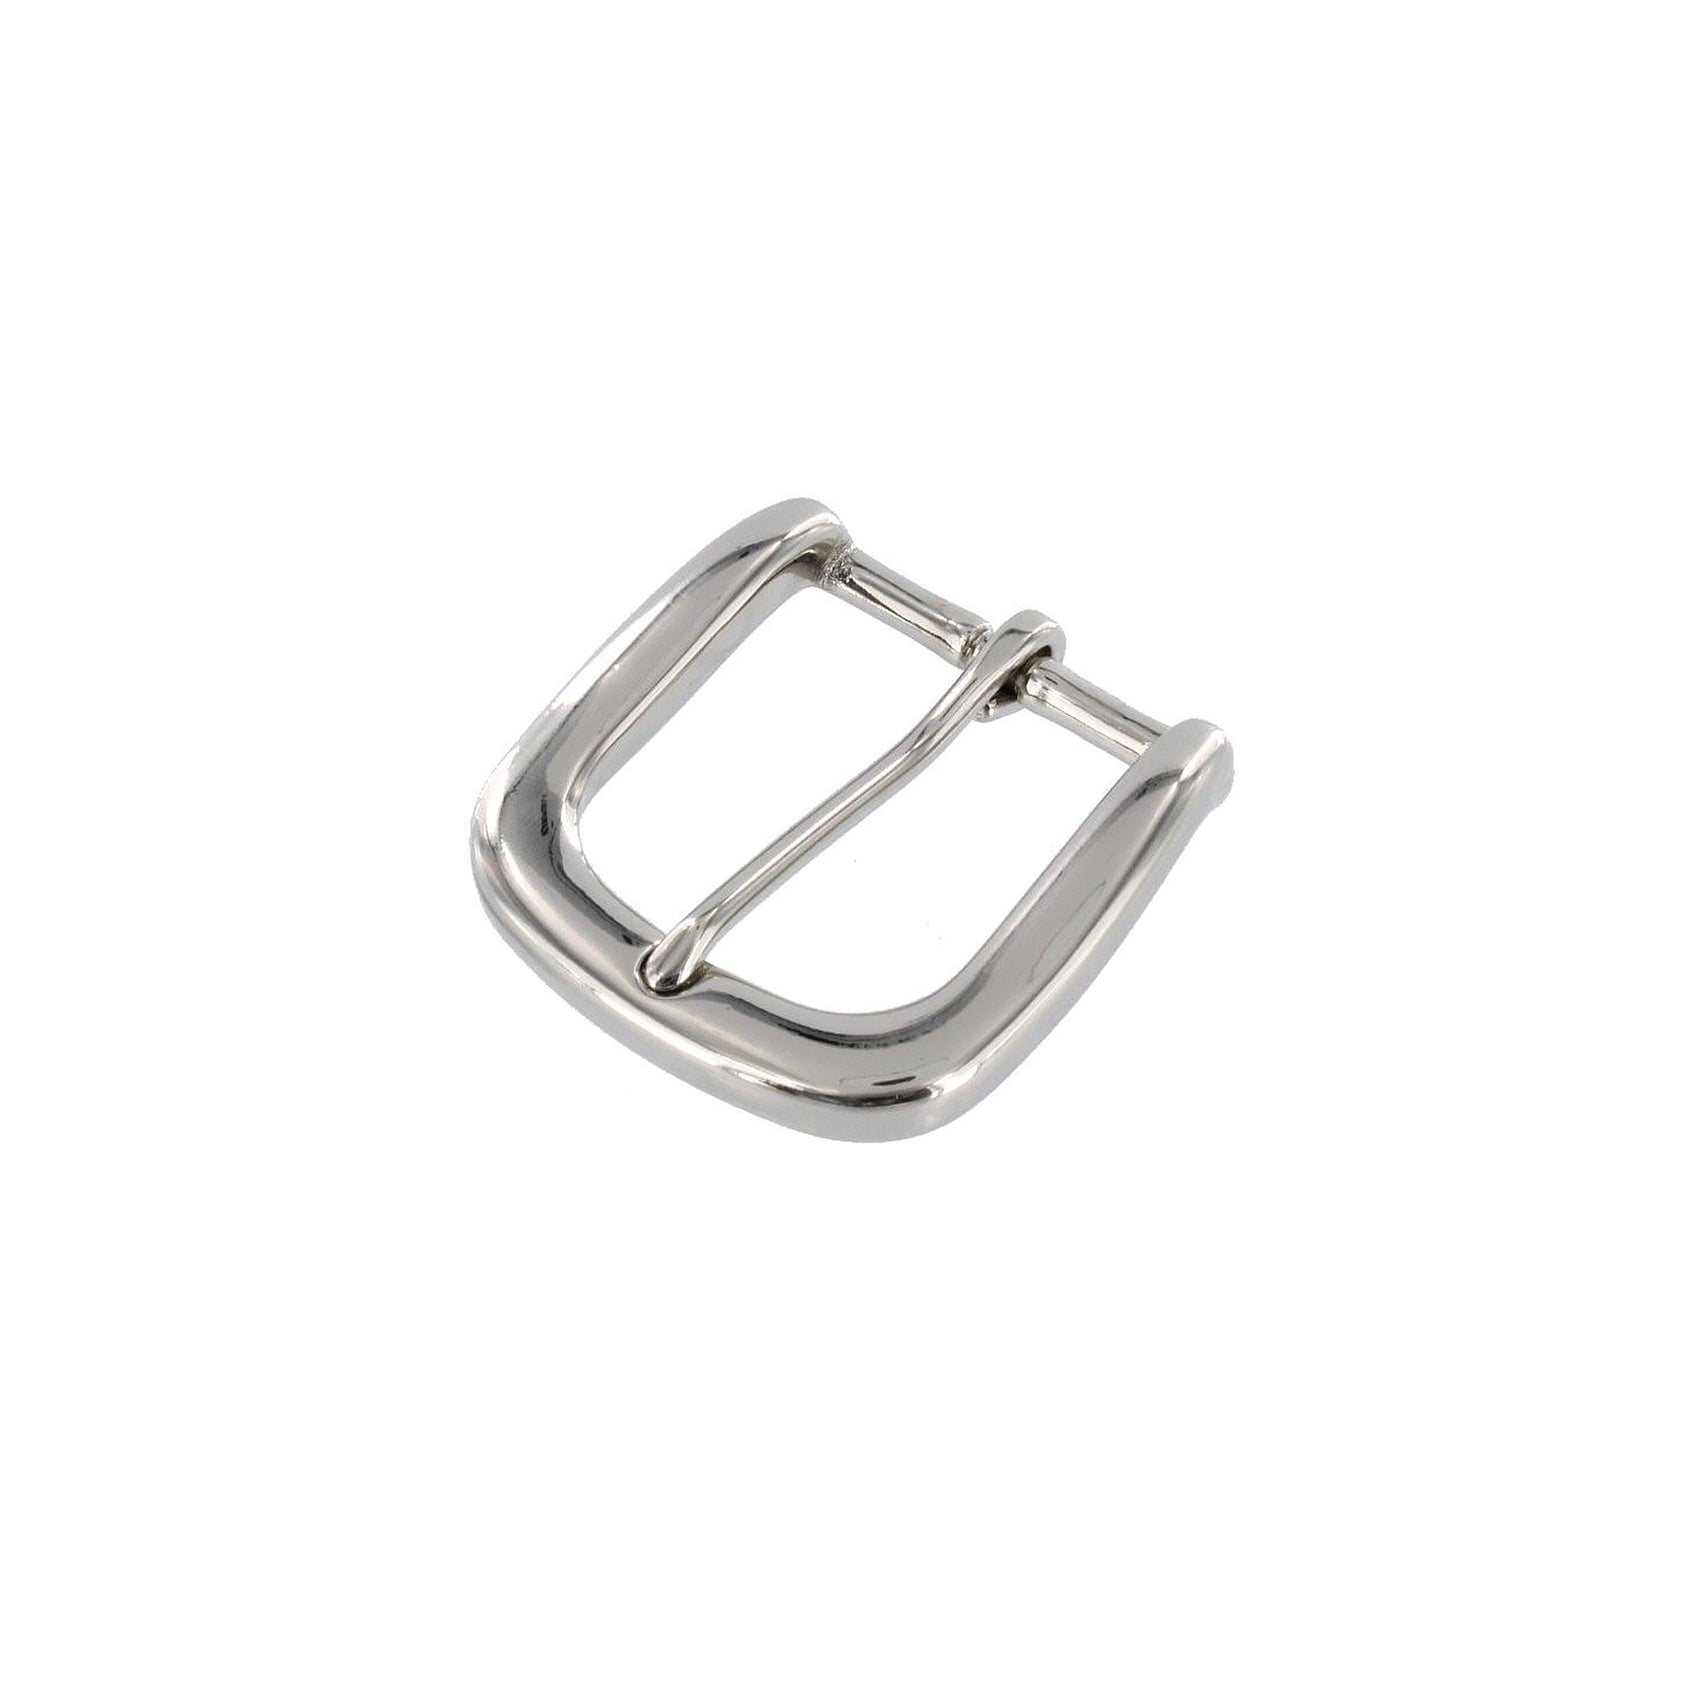 1 1/2" Canary Seasonal Belt with Oxford Cocktail Buckle in Polished Nickel